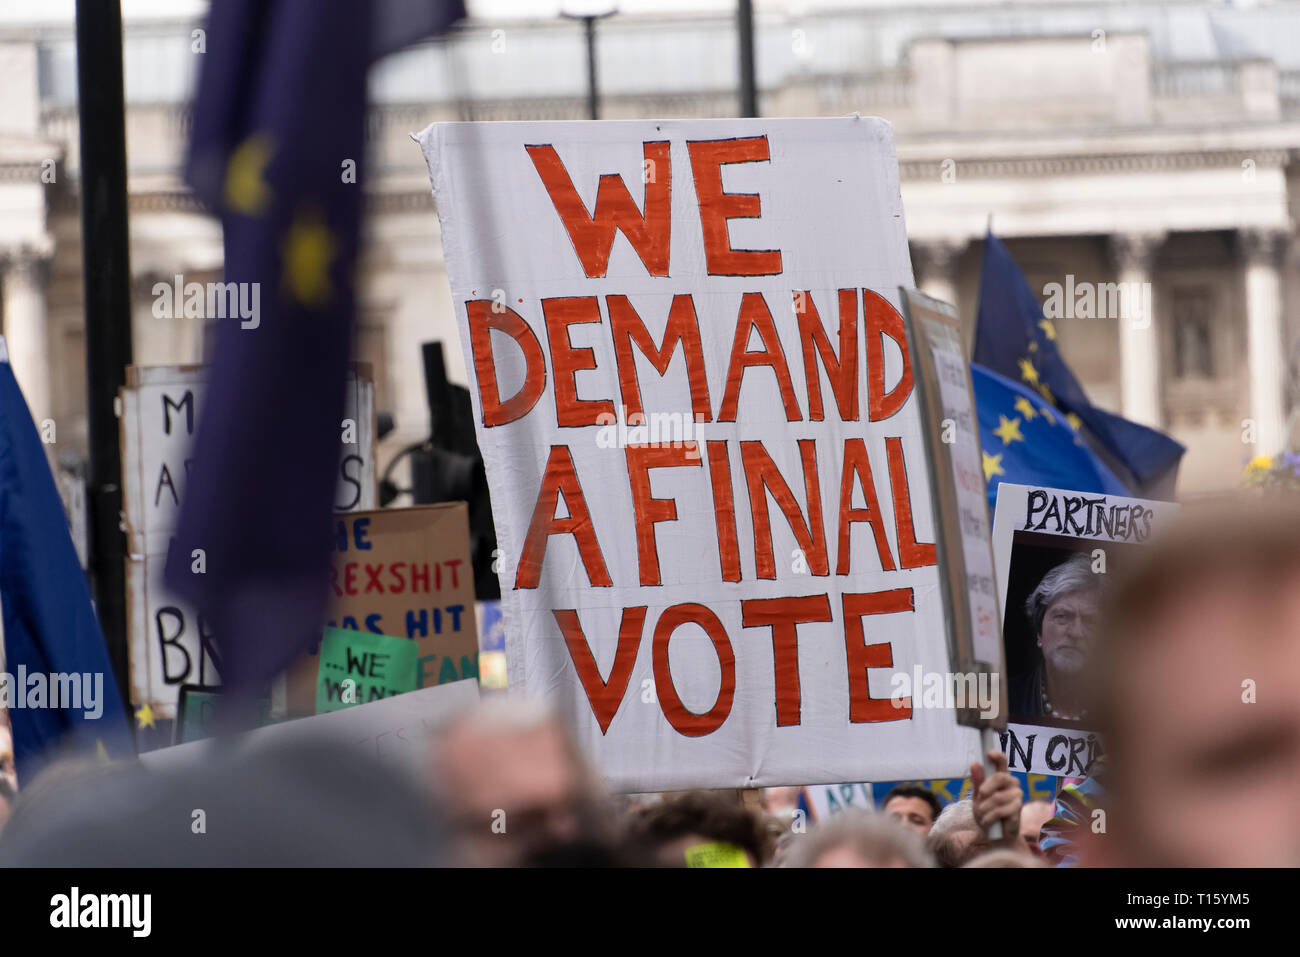 London, UK. 23rd Mar, 2019. Peoples Vote March, Demand final vote placard. Crowd detail and banners as taken from the perspective of a protester. Remain banners, second referendum. Credit: Tony Pincham/Alamy Live News Stock Photo